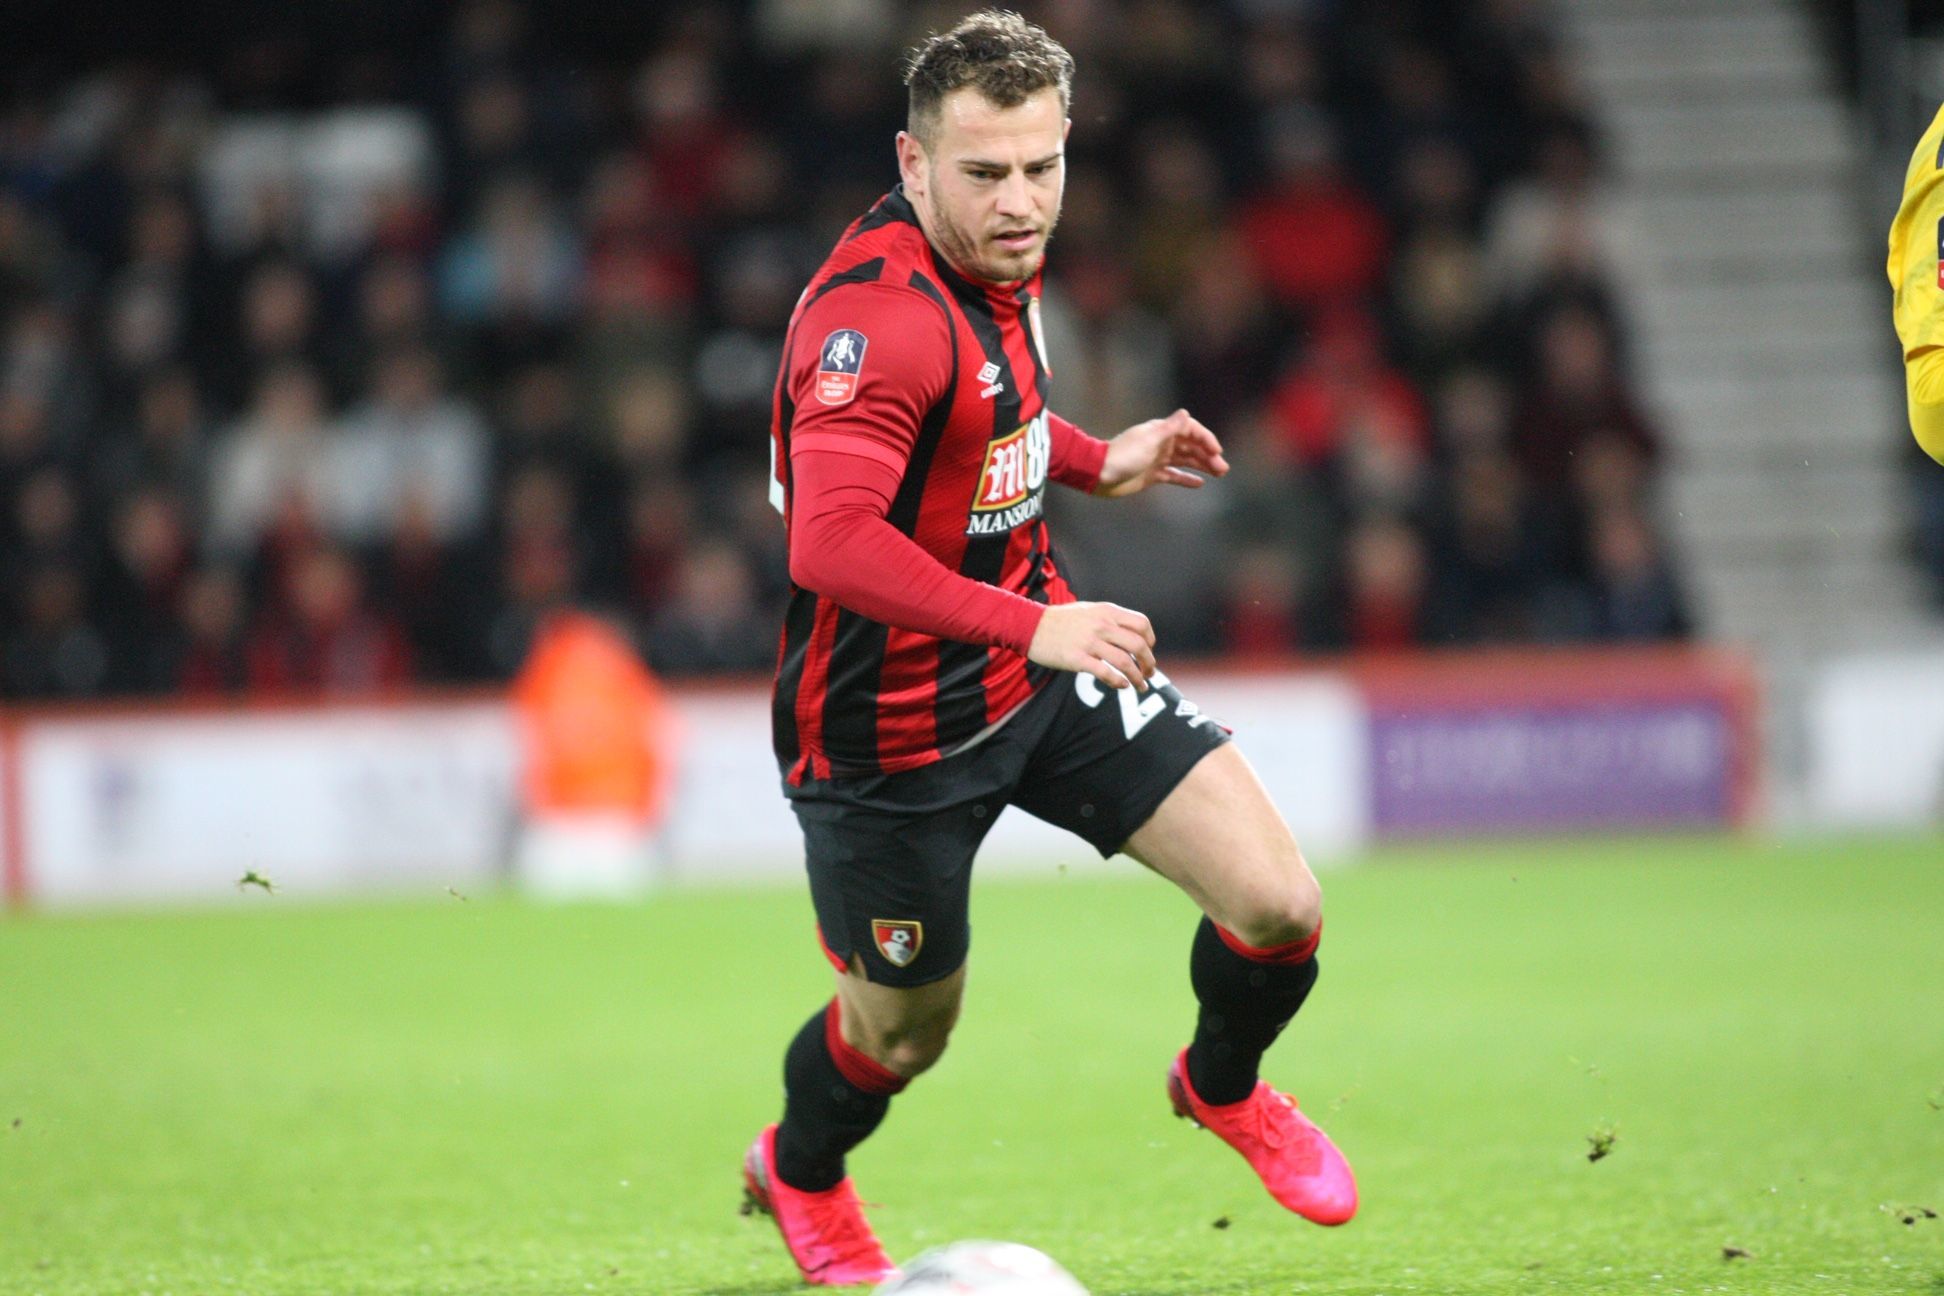 Graeme Souness believes clubs 'will take a chance' on Ryan Fraser, amid Tottenham speculation